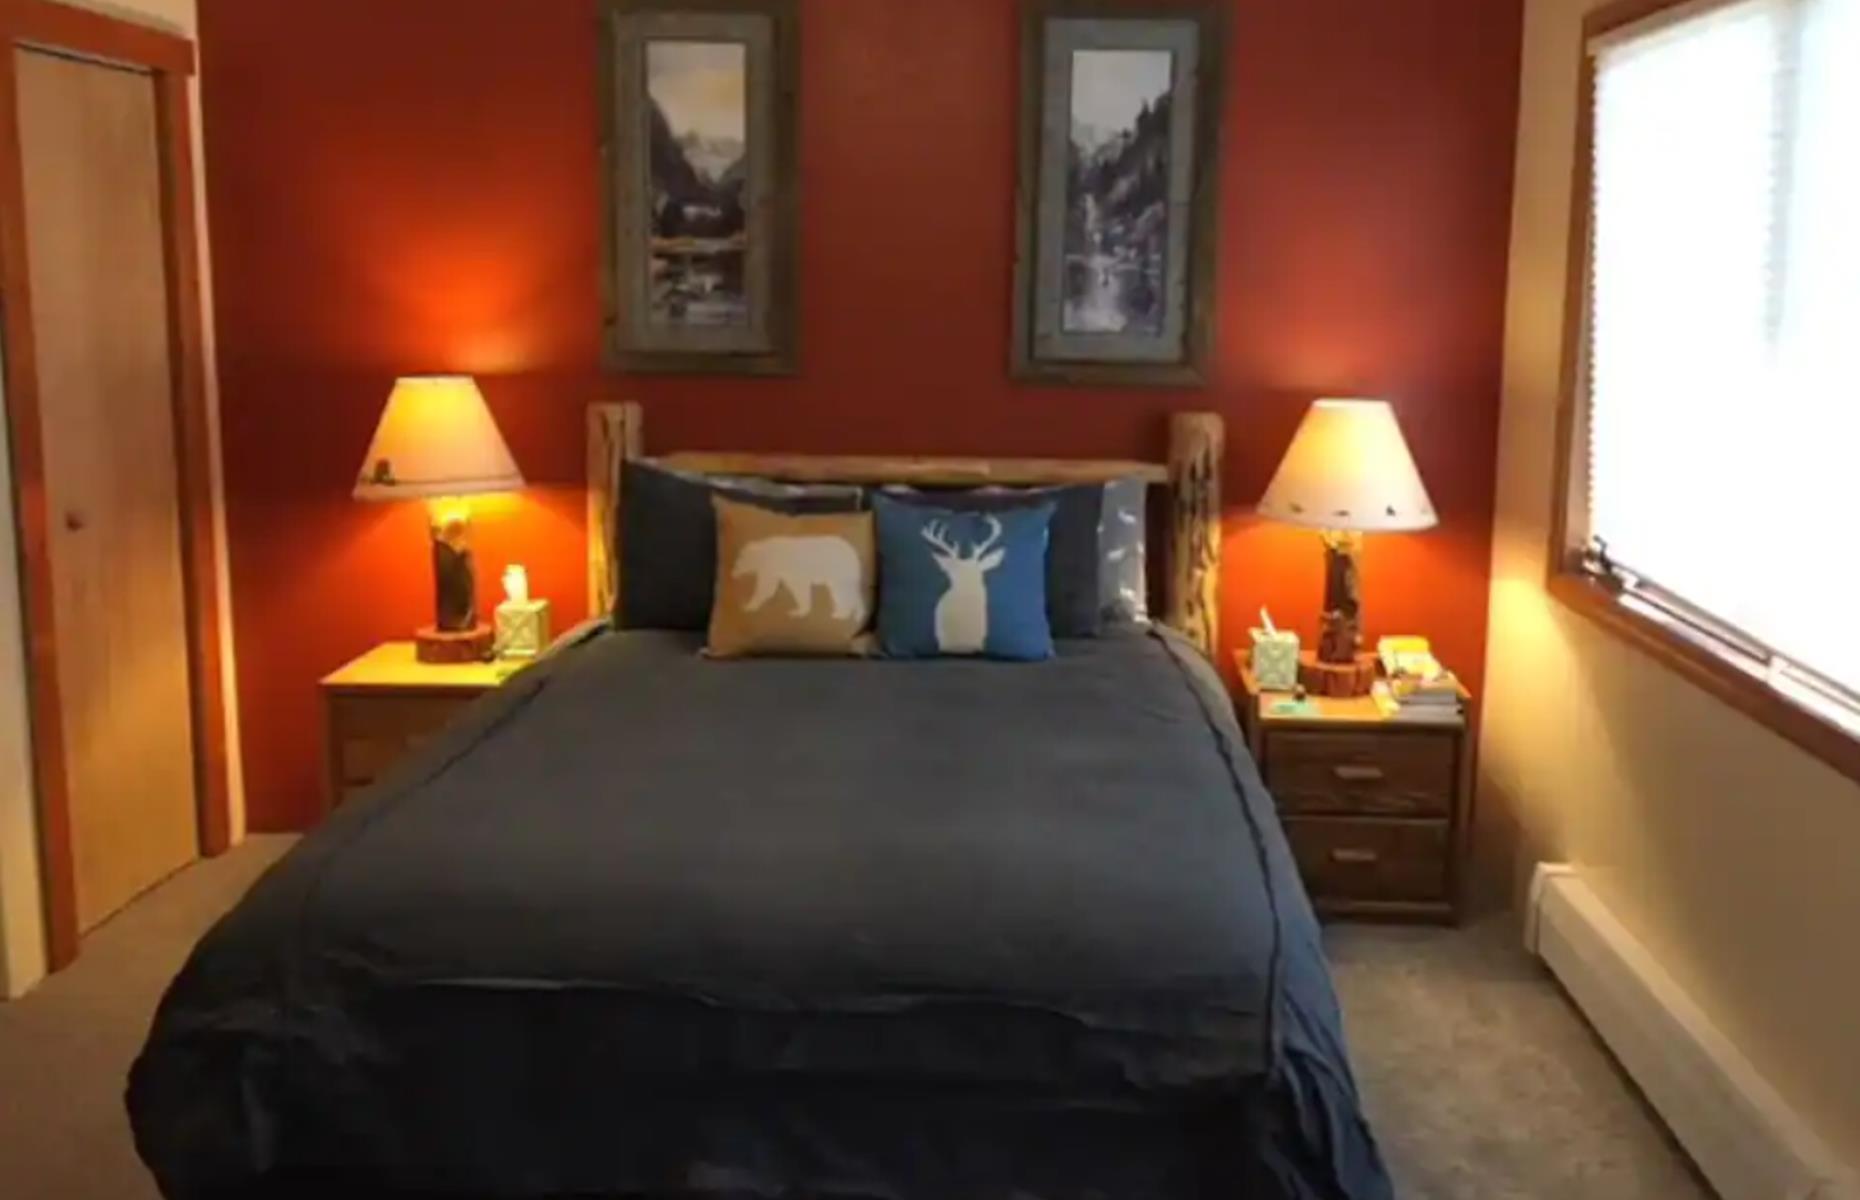 <p>As locations go, this could hardly be any better. The <a href="https://www.airbnb.co.uk/rooms/4041538/">private bedroom</a>, sleeping two, is at the base of the Snow King ski area, within walking distance of downtown Jackson with its brewpubs, cafés and restaurants and a short drive from Grand Teton National Park. So guests can have the best of all worlds for around $91 a night. The cozy suite has a private bathroom, a microwave and mini-refrigerator, and the hosts provide tea, coffee and snacks.</p>  <p><a href="https://www.loveexploring.com/gallerylist/66286/the-best-bed-and-breakfast-in-every-us-state-and-dc"><strong>Now check out the best B&B in every state and DC</strong></a></p>